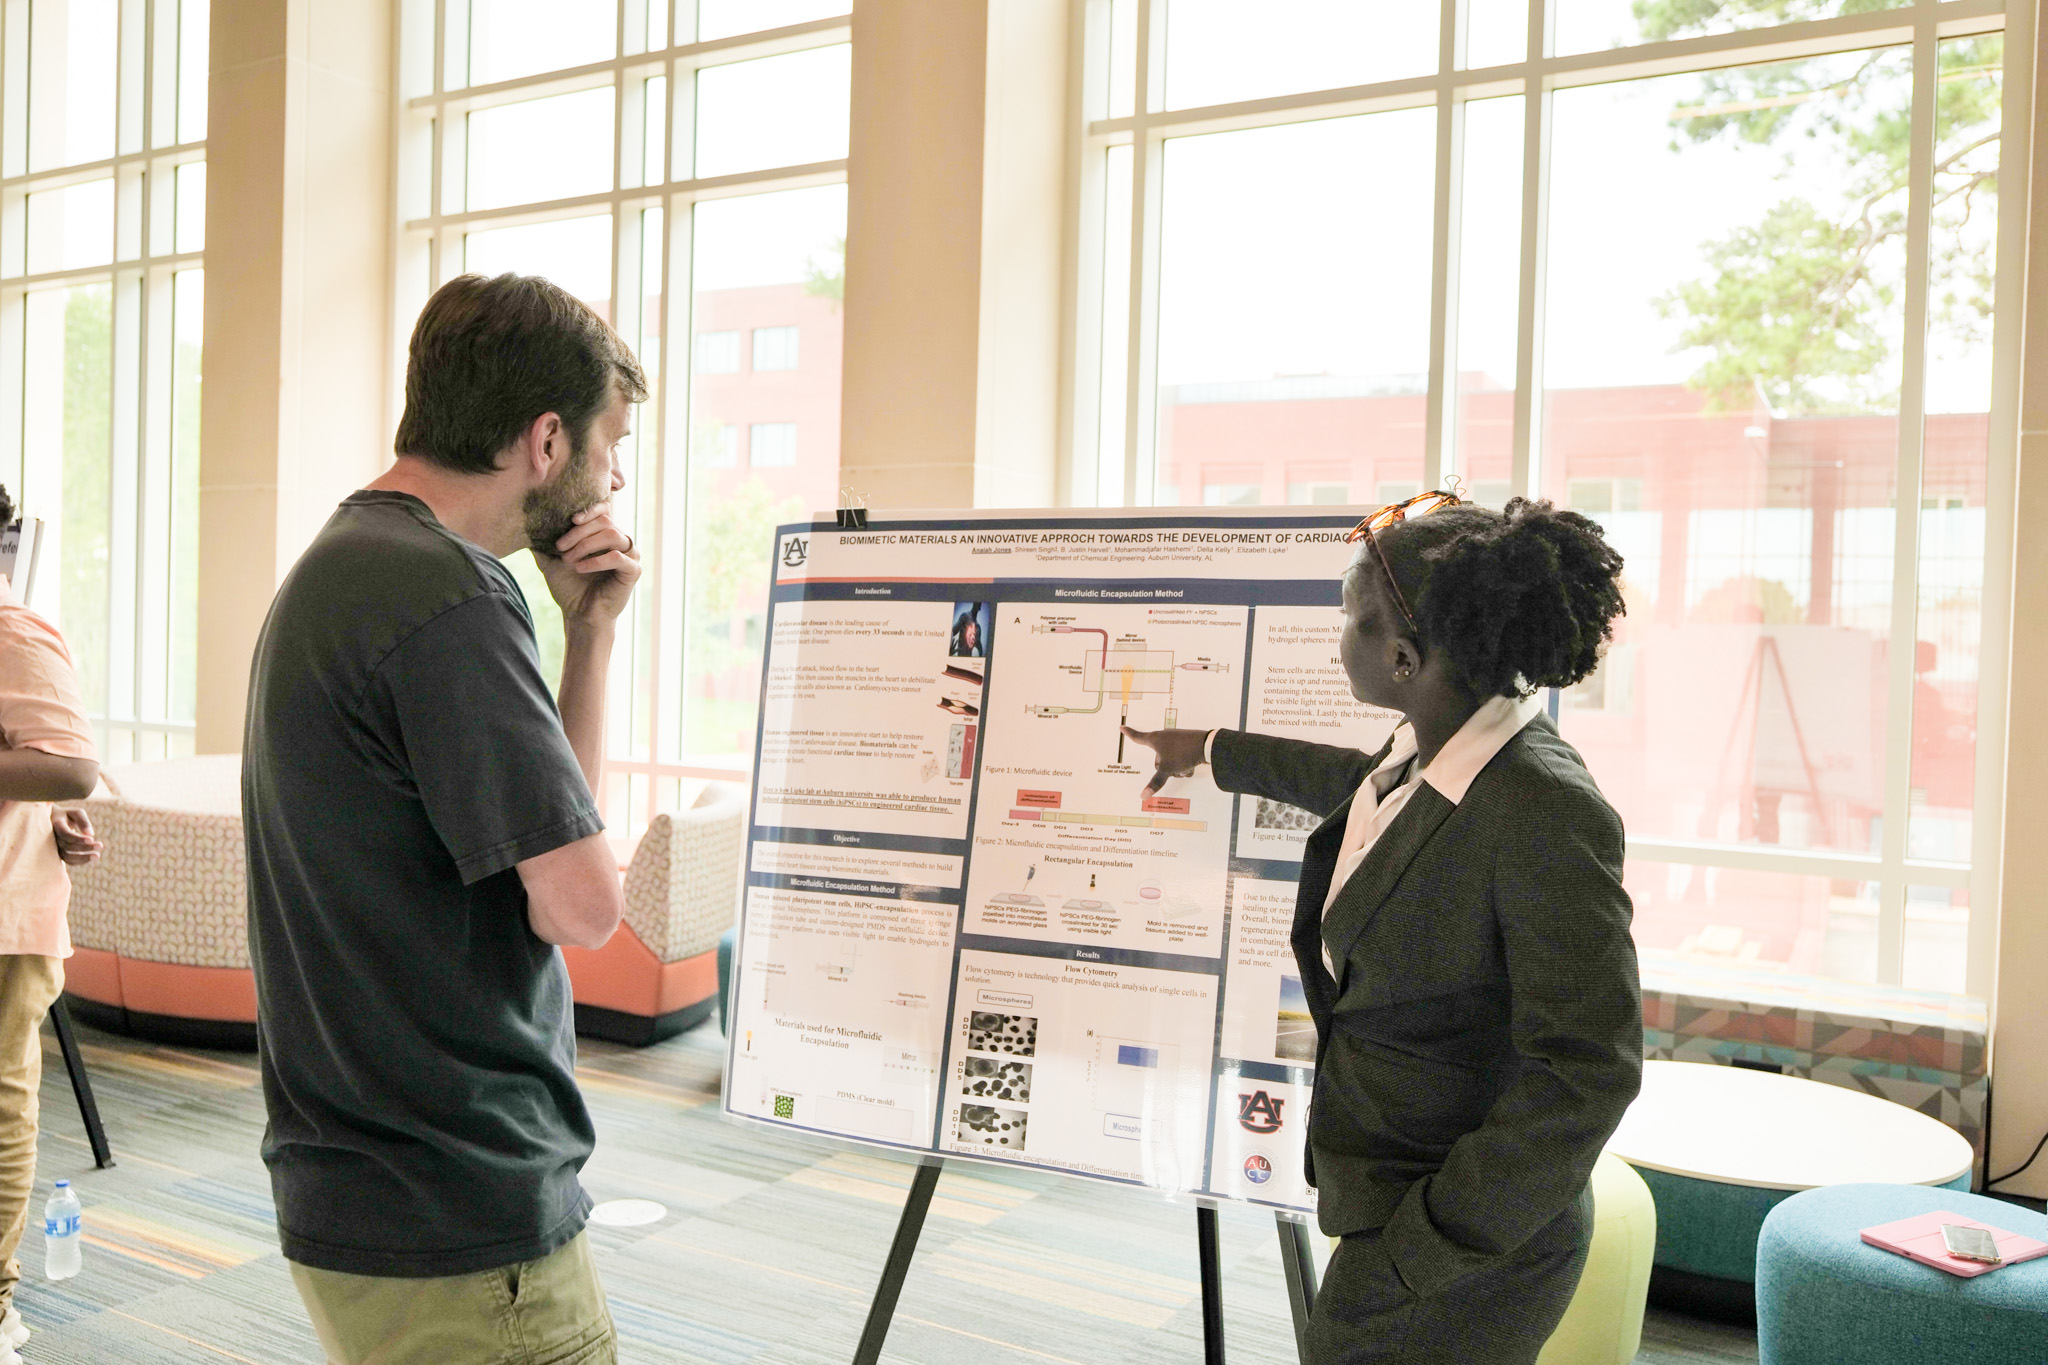 Anaiah Jones discusses her research poster and points out methods she learned this summer.